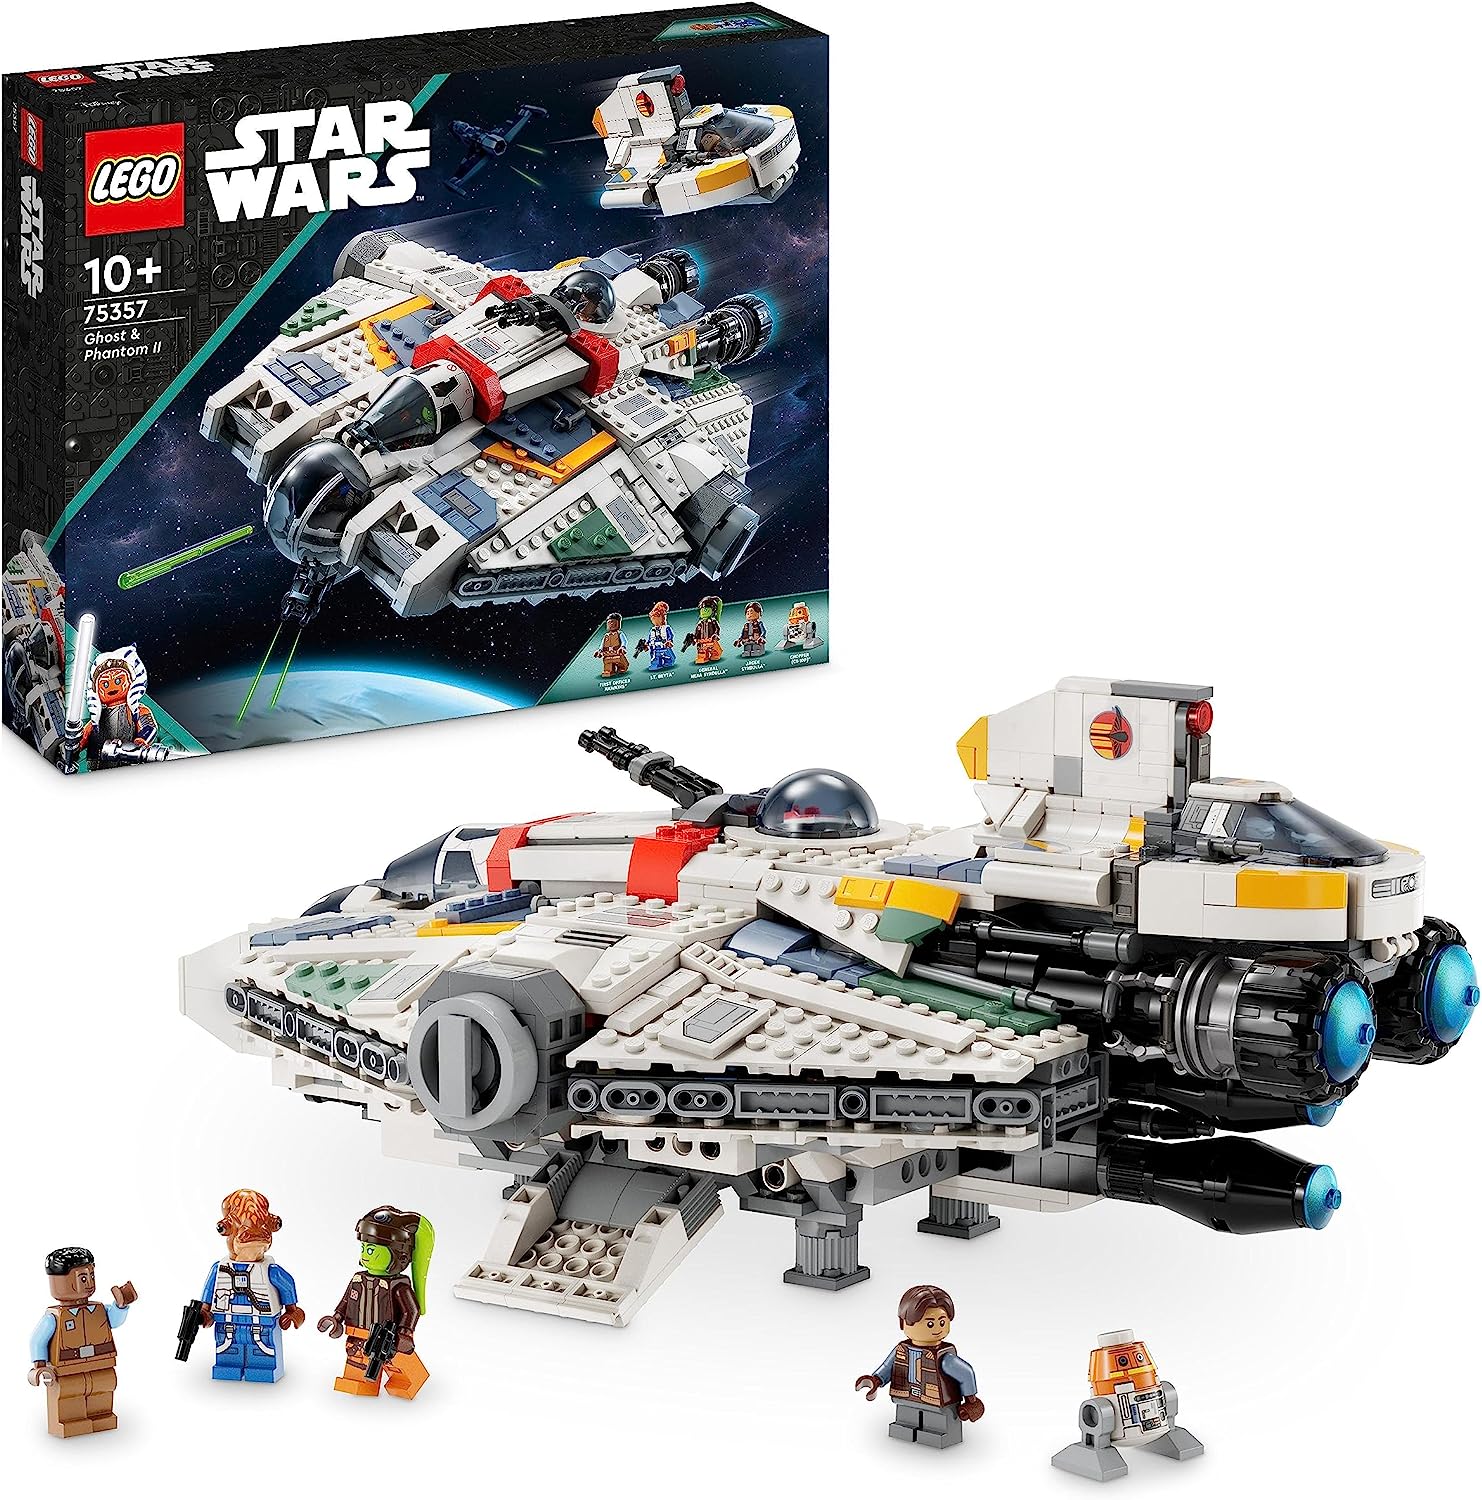 LEGO 75357 Star Wars Ghost & Phantom II Set of 2 Ahsoka Vehicles, Buildable Spaceship Toy with 5 Figures Including Jacen Syndulla and Droid Figure, Christmas Gift for Boys and Girls